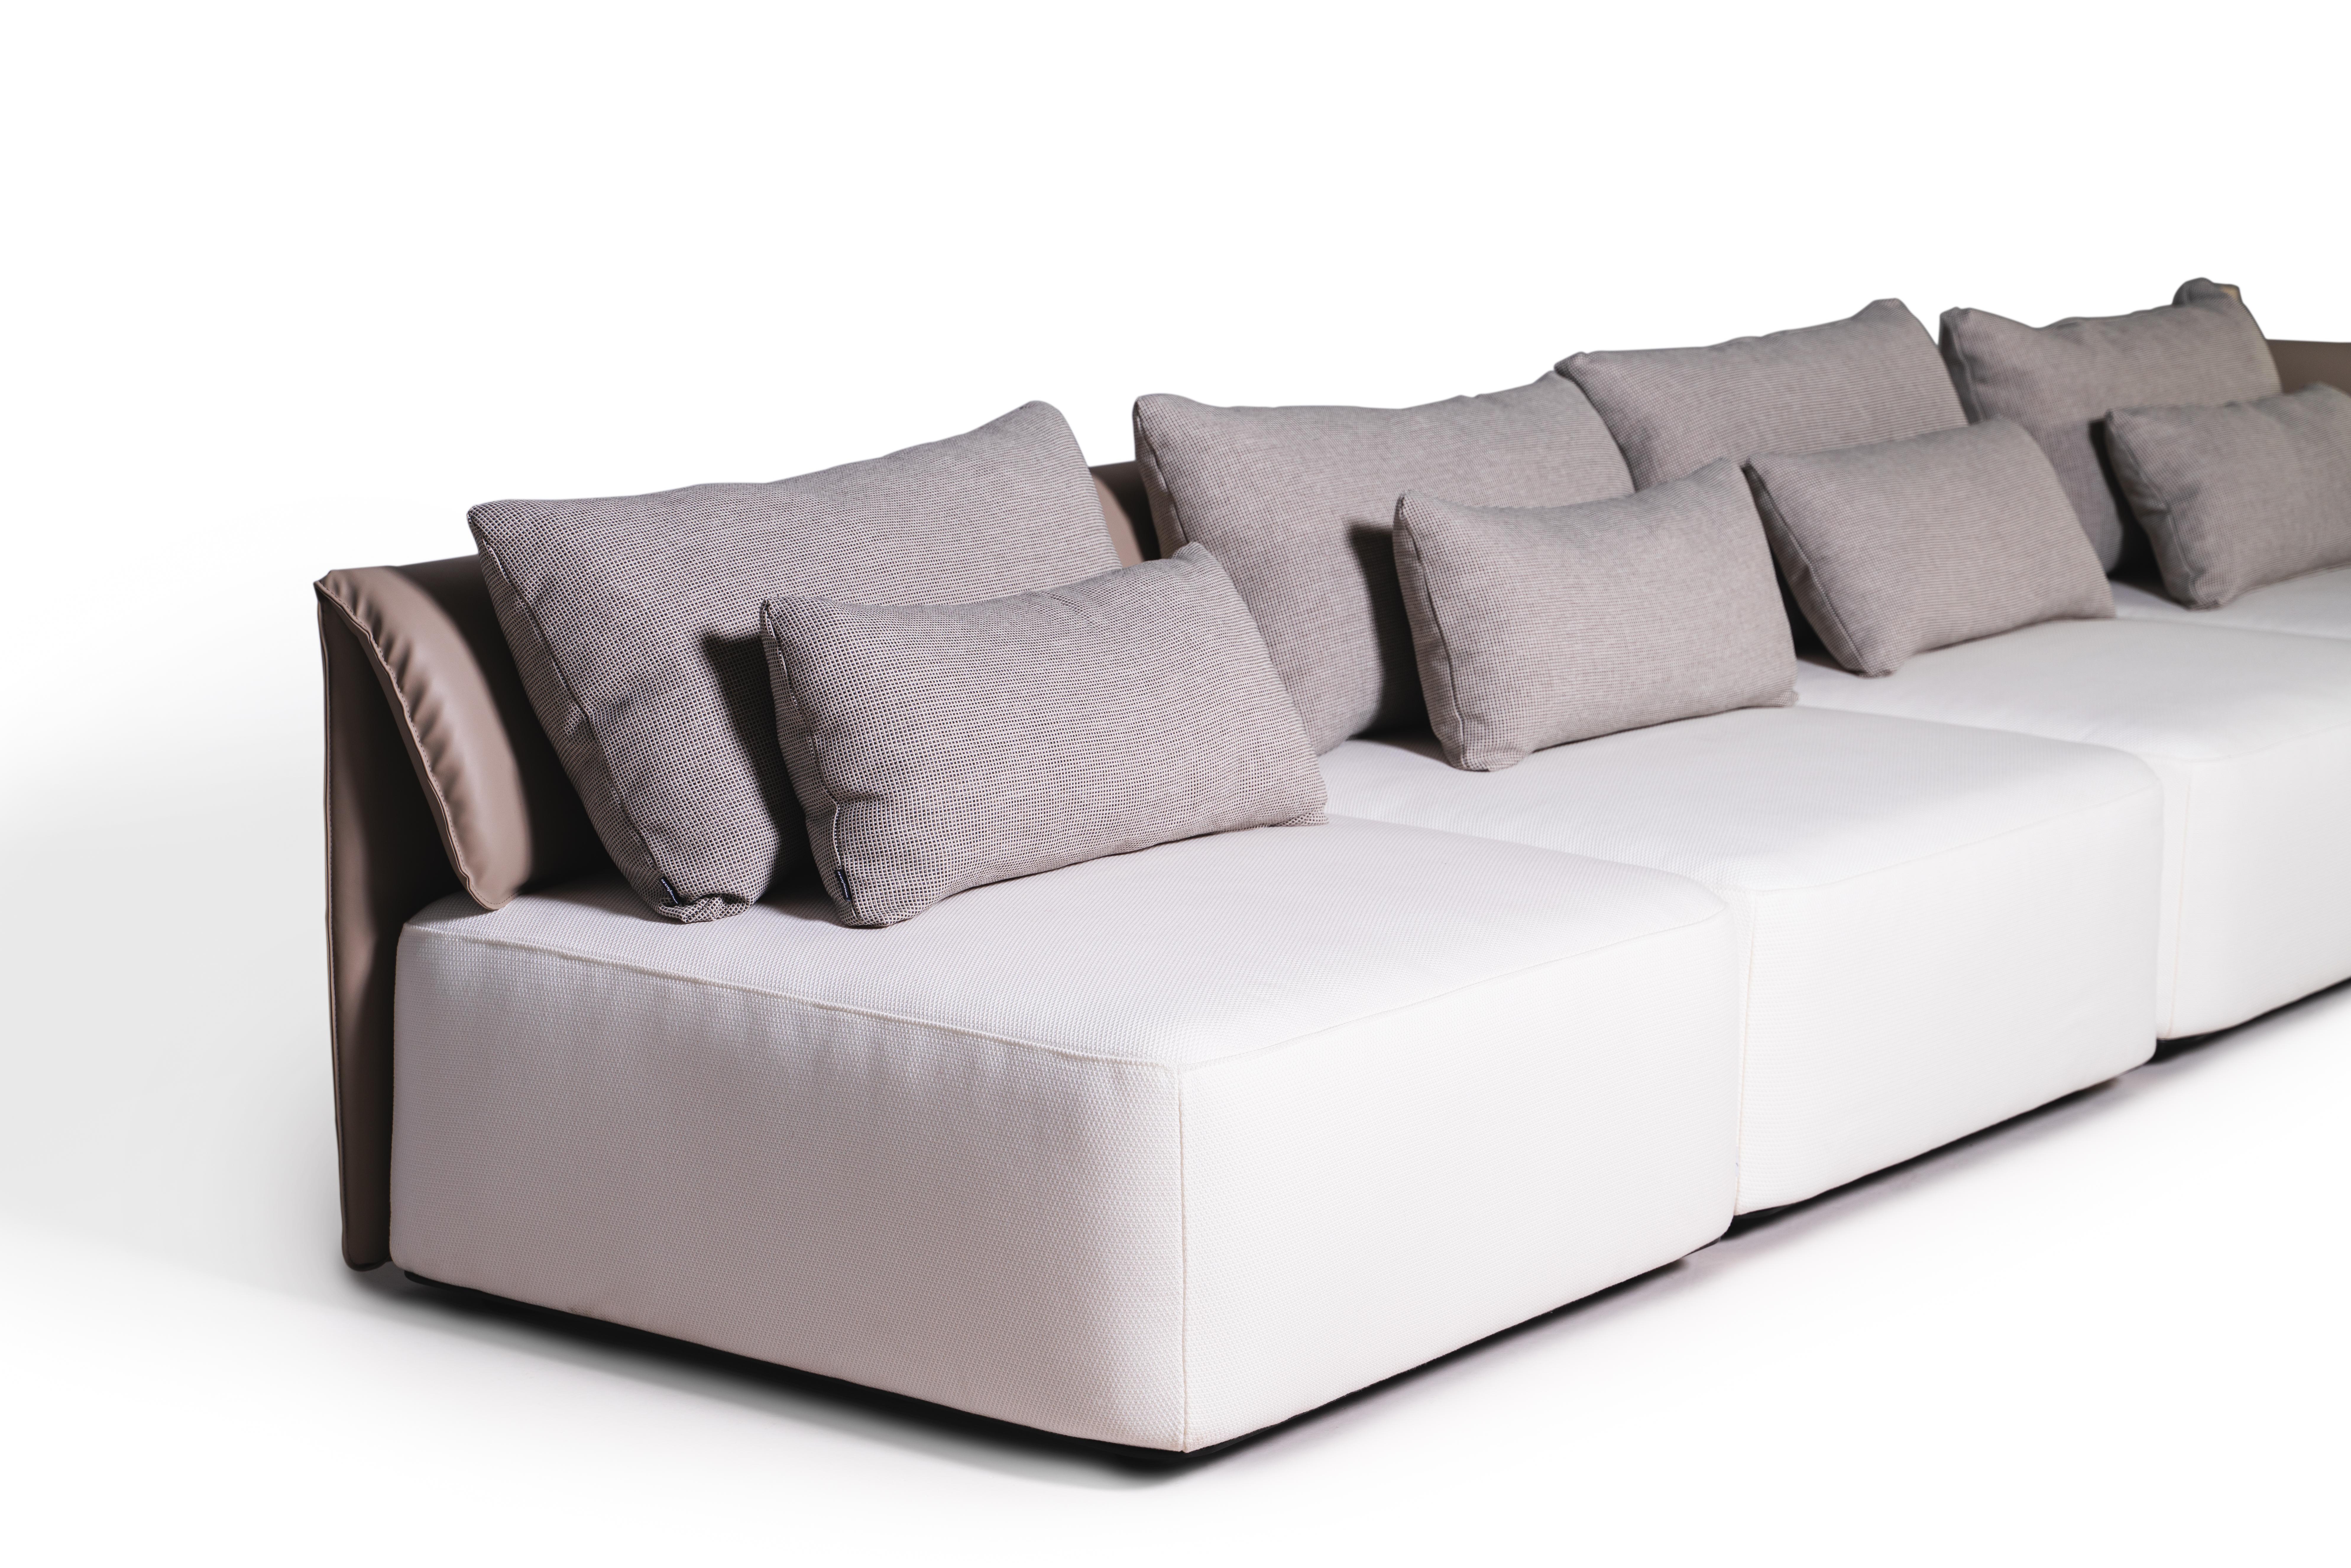 Nomad Modular Sofa - 4 different modules available.

The Nomad sofa is more than just a simple piece of outdoor furniture. It is a flexible and adaptable seating solution that can be customized to suit different needs and preferences. 

With its